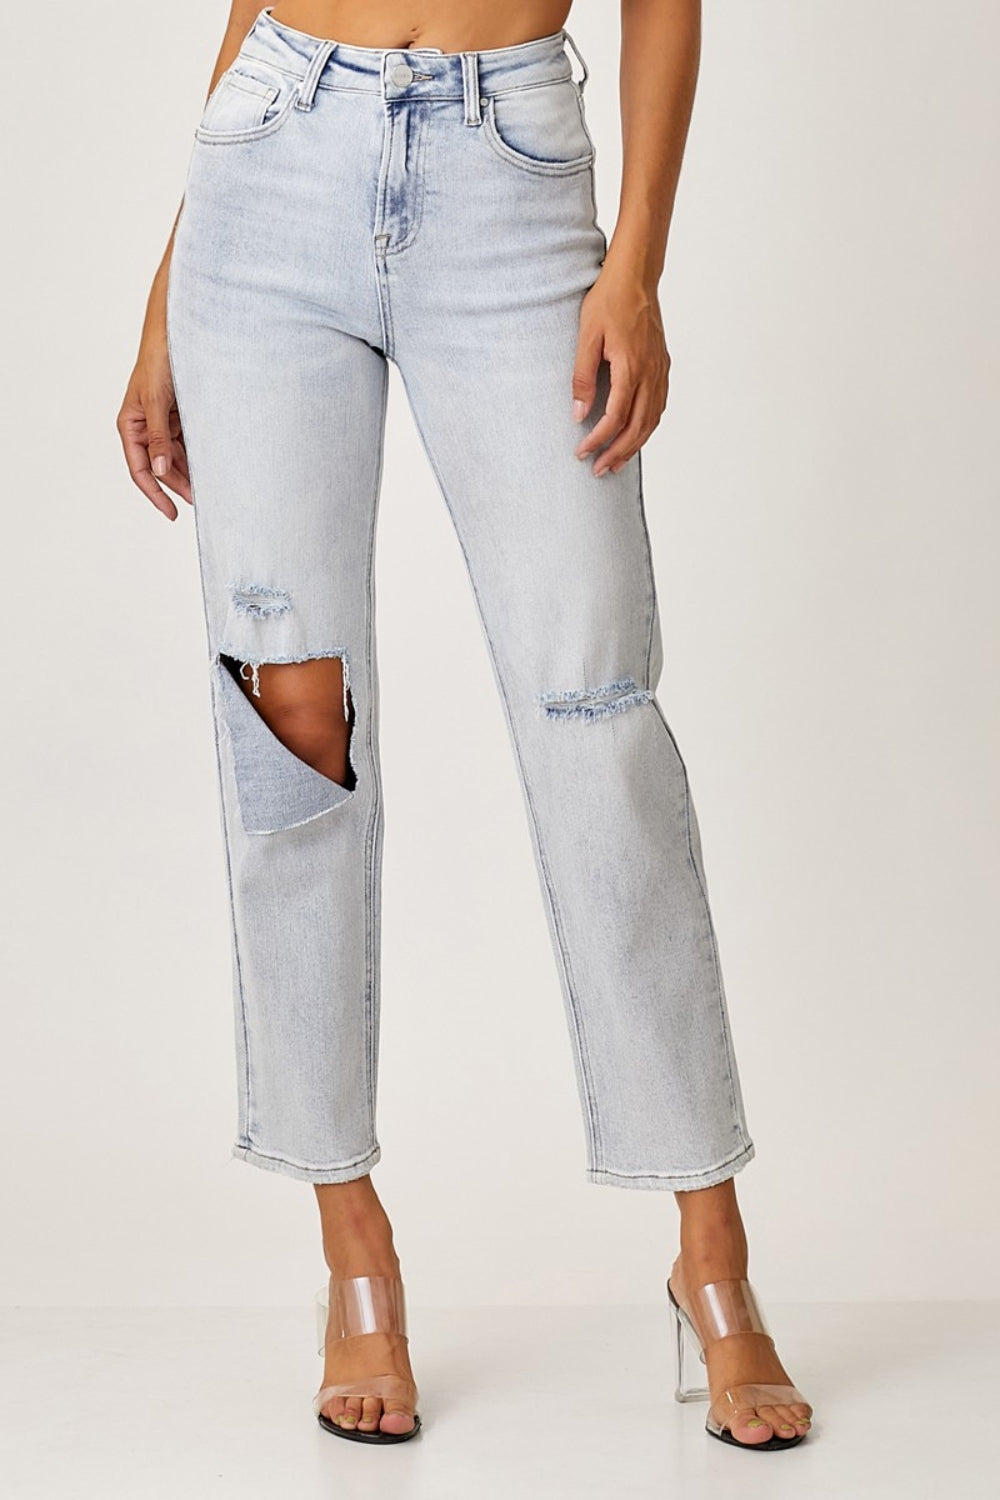 RISEN Kirra High Rise Distressed Relaxed Jeans